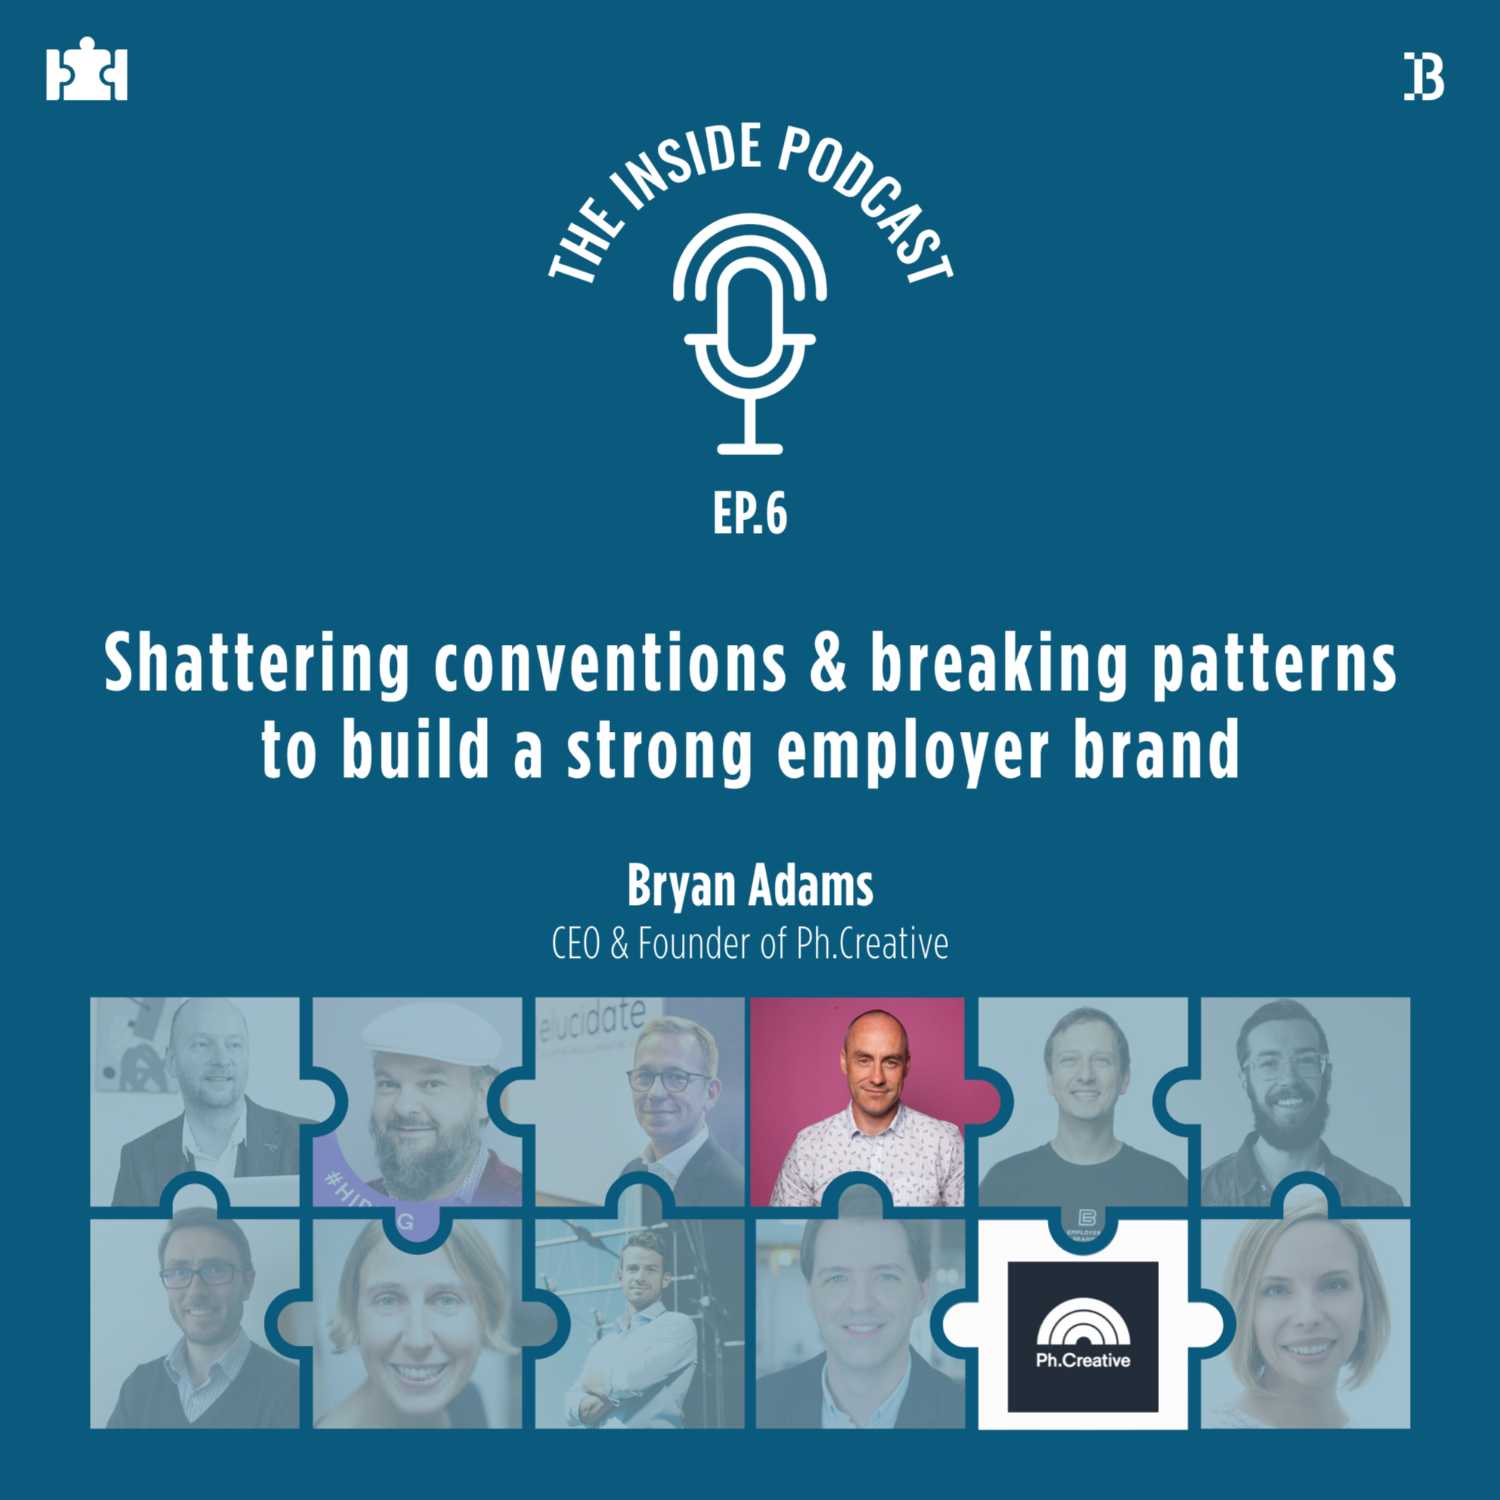 “Shattering conventions & breaking patterns to build a strong employer brand”, with Bryan Adams, CEO & Founder of Ph.Creative (Employer Brand Agency)